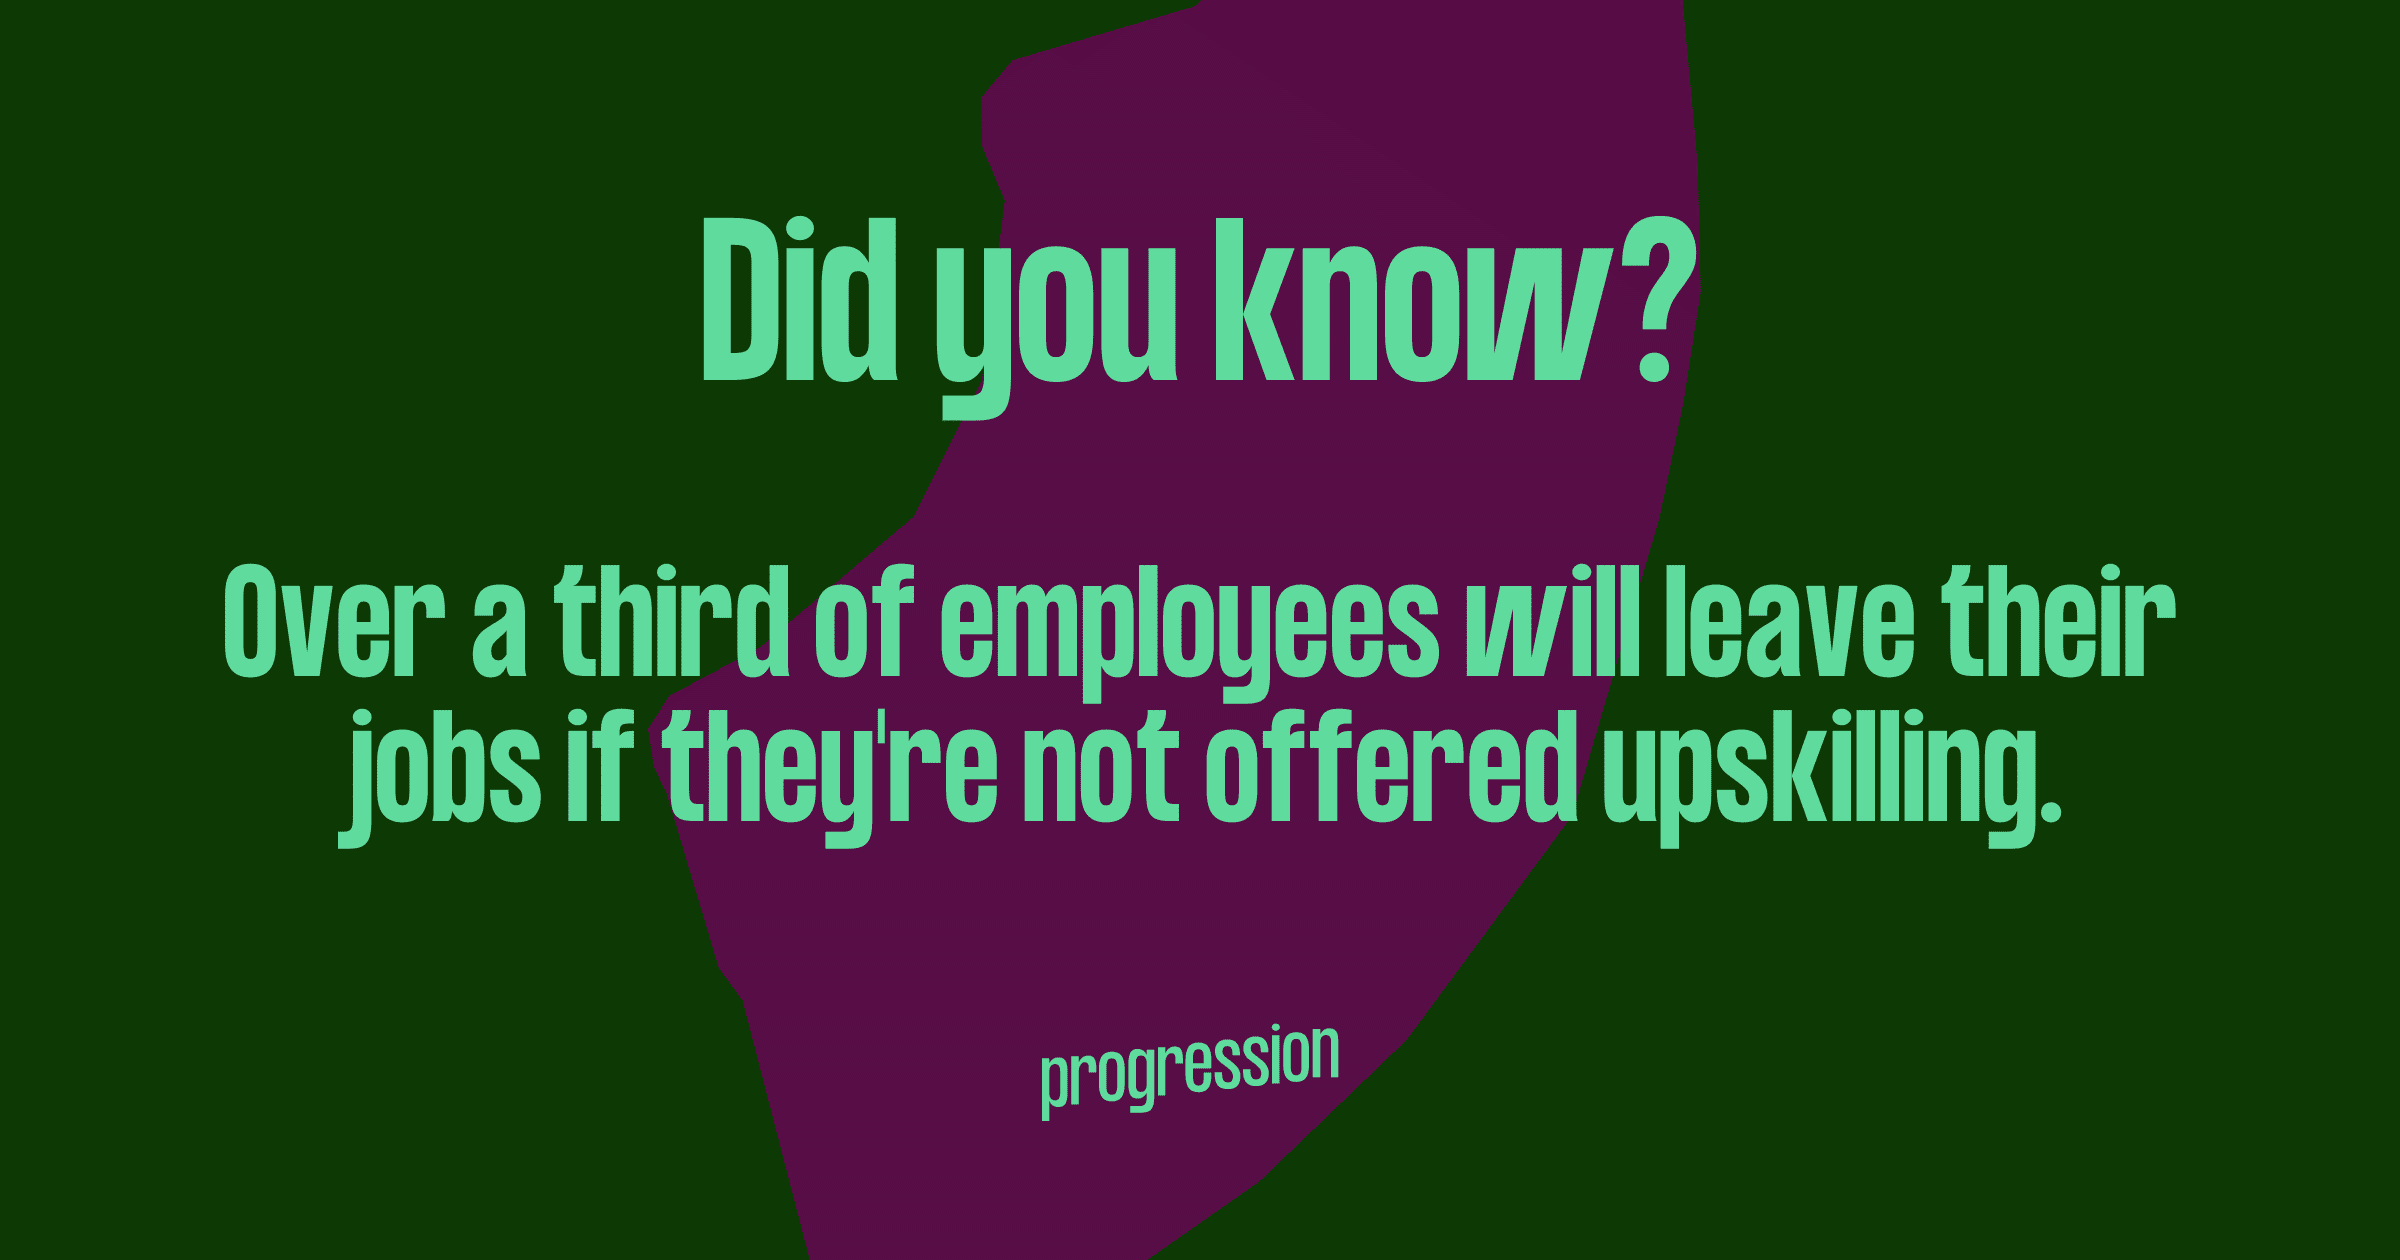 Graphic highlighting how over a third of employees leave their jobs for lack of upskilling opportunities